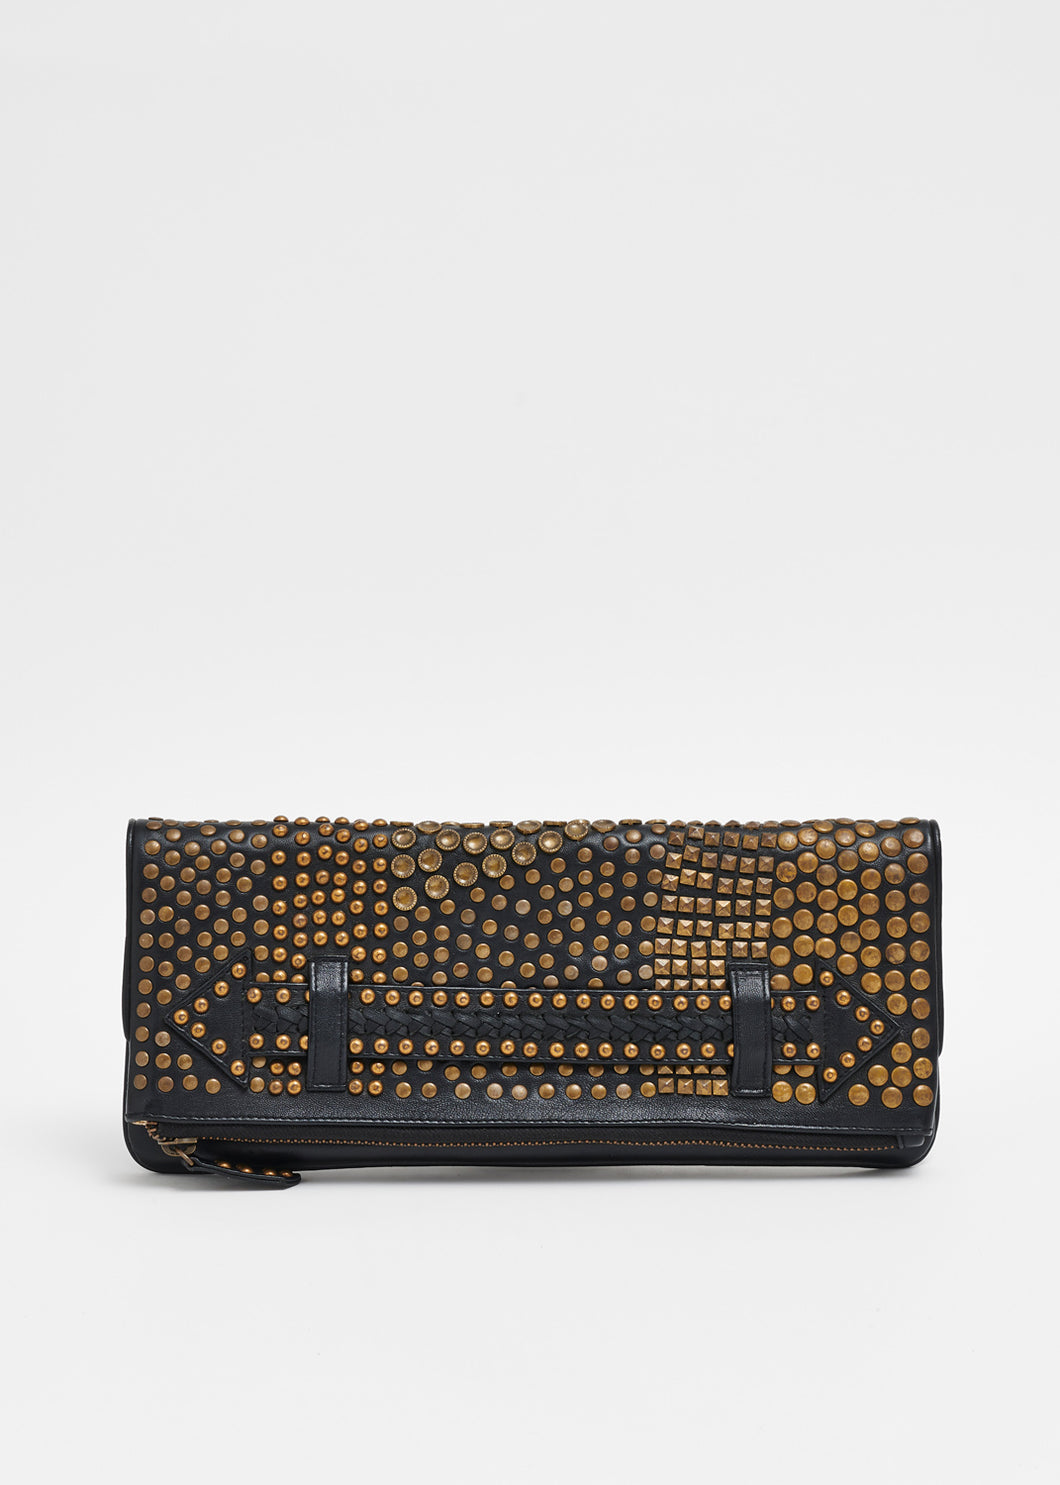 Studded_Clutch_in_Black